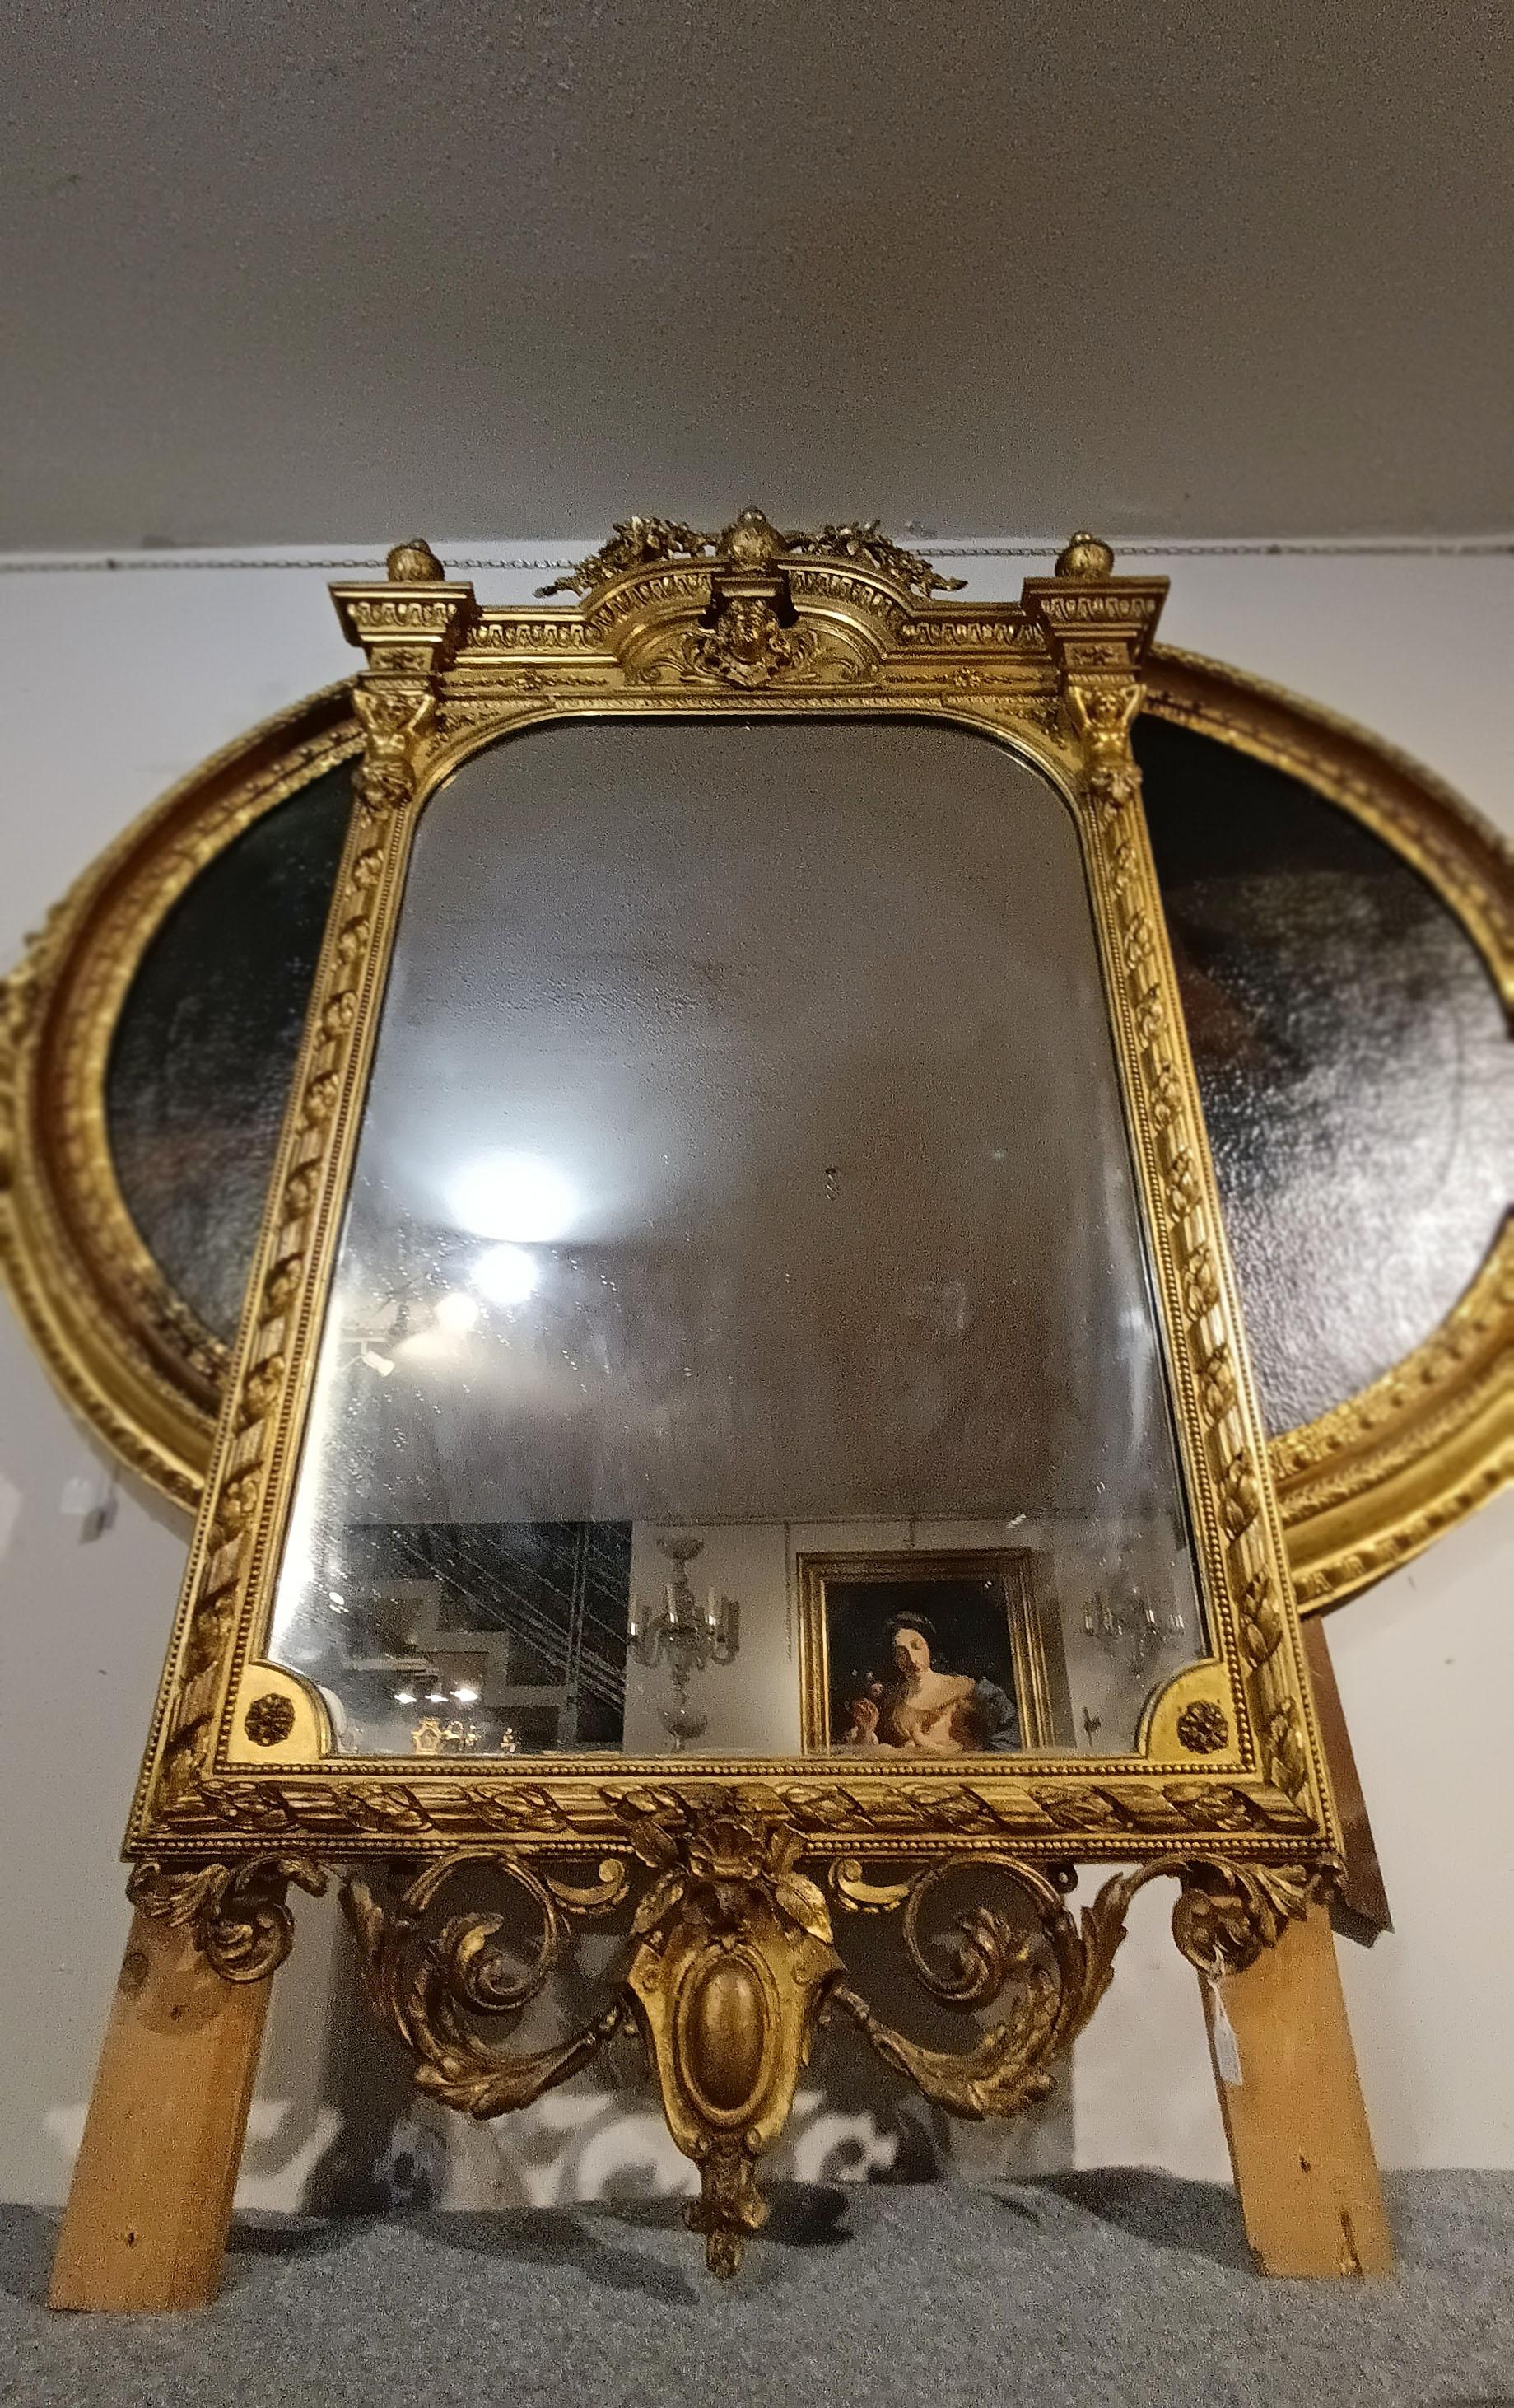 END OF THE 18th CENTURY GOLDEN MIRROR WITH CARYATIDS For Sale 2